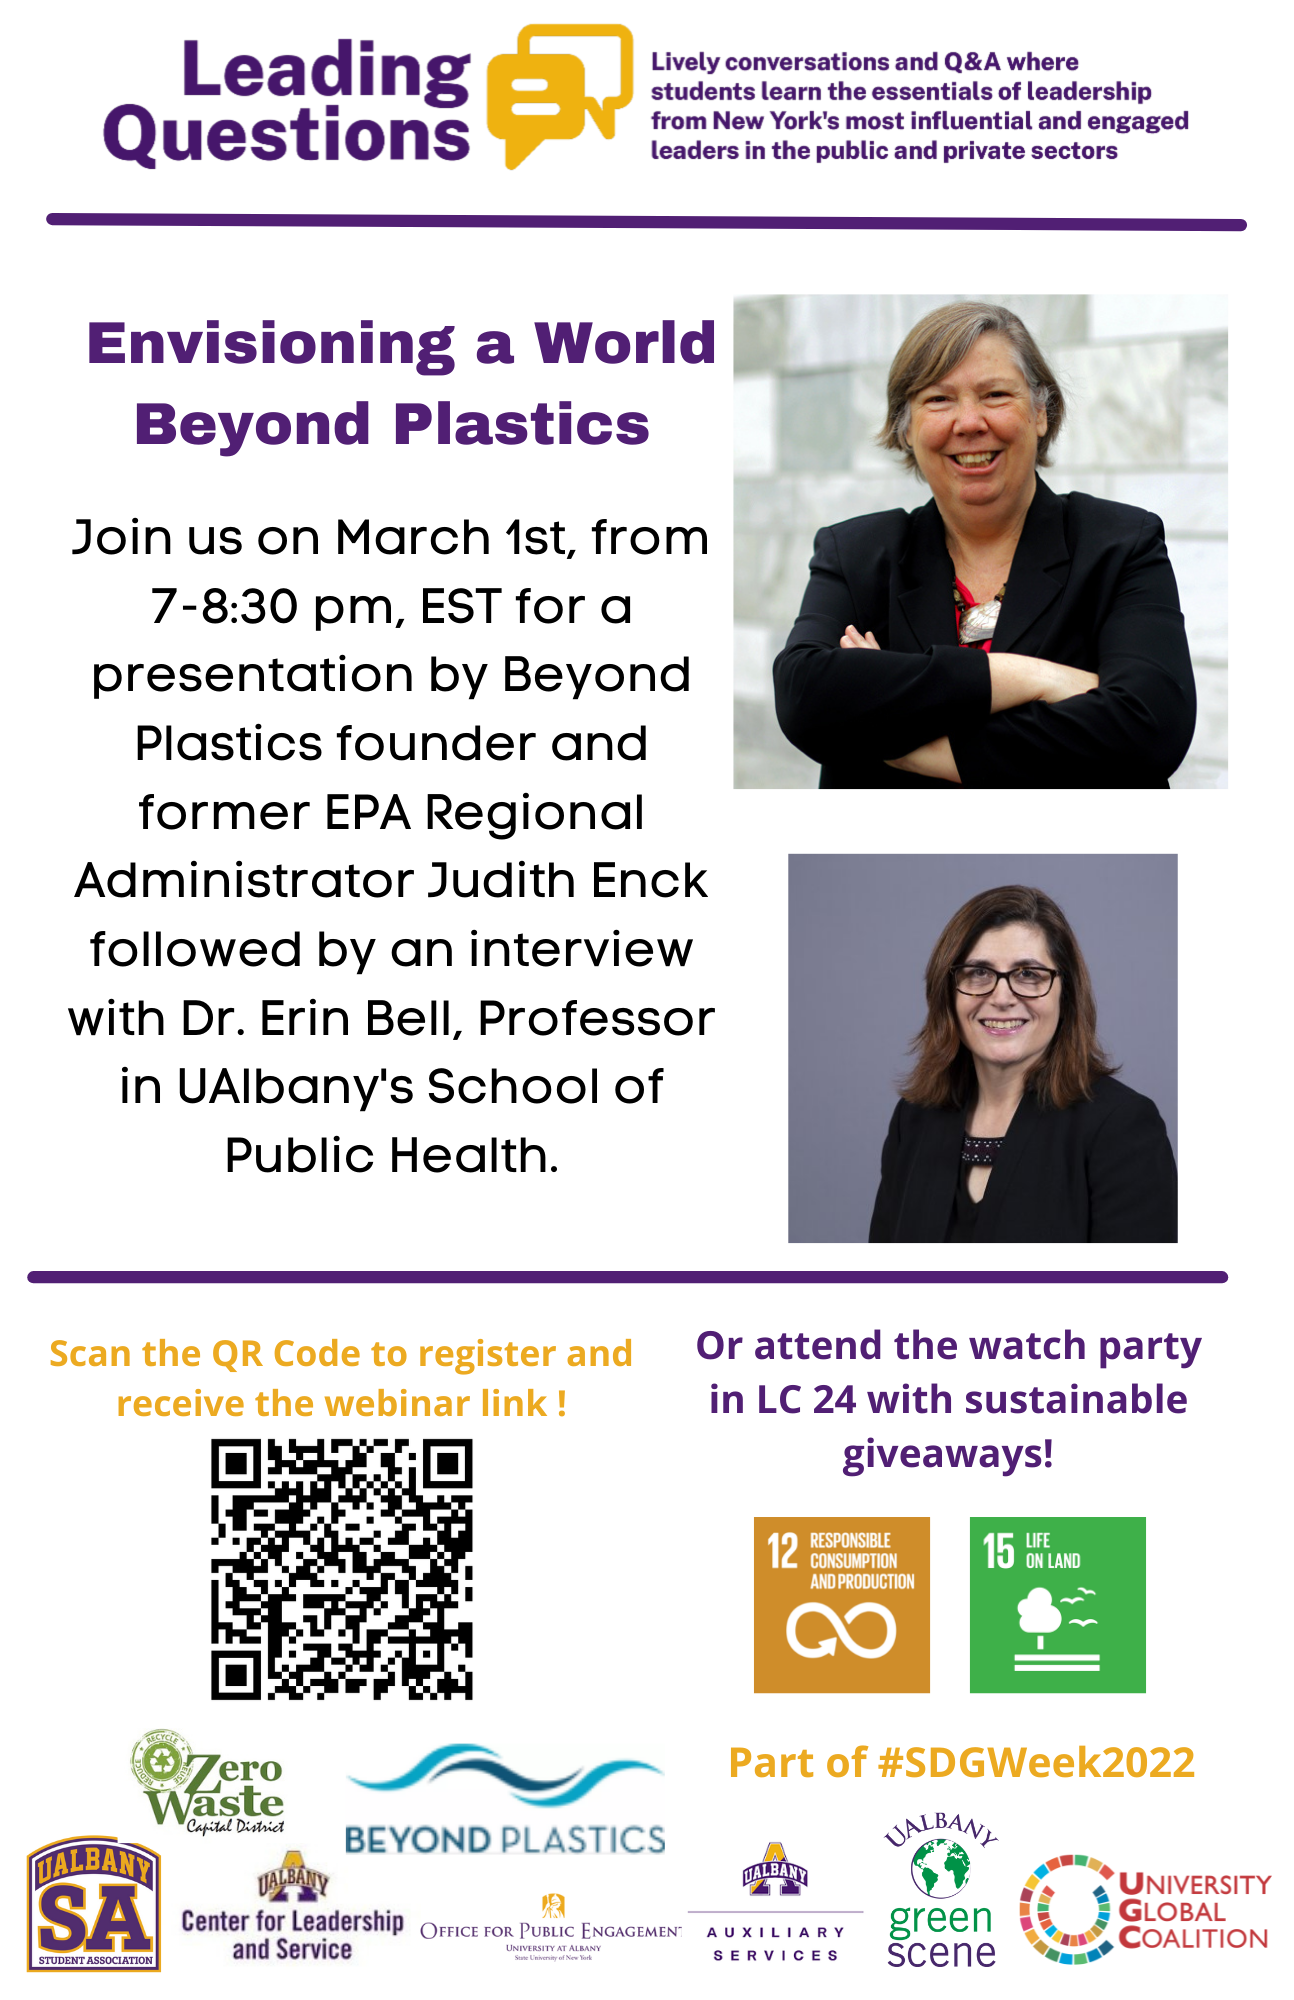 Envisioning a World Beyond Plastics | University of Albany’s Leading Questions Series Welcomes Judith Enck